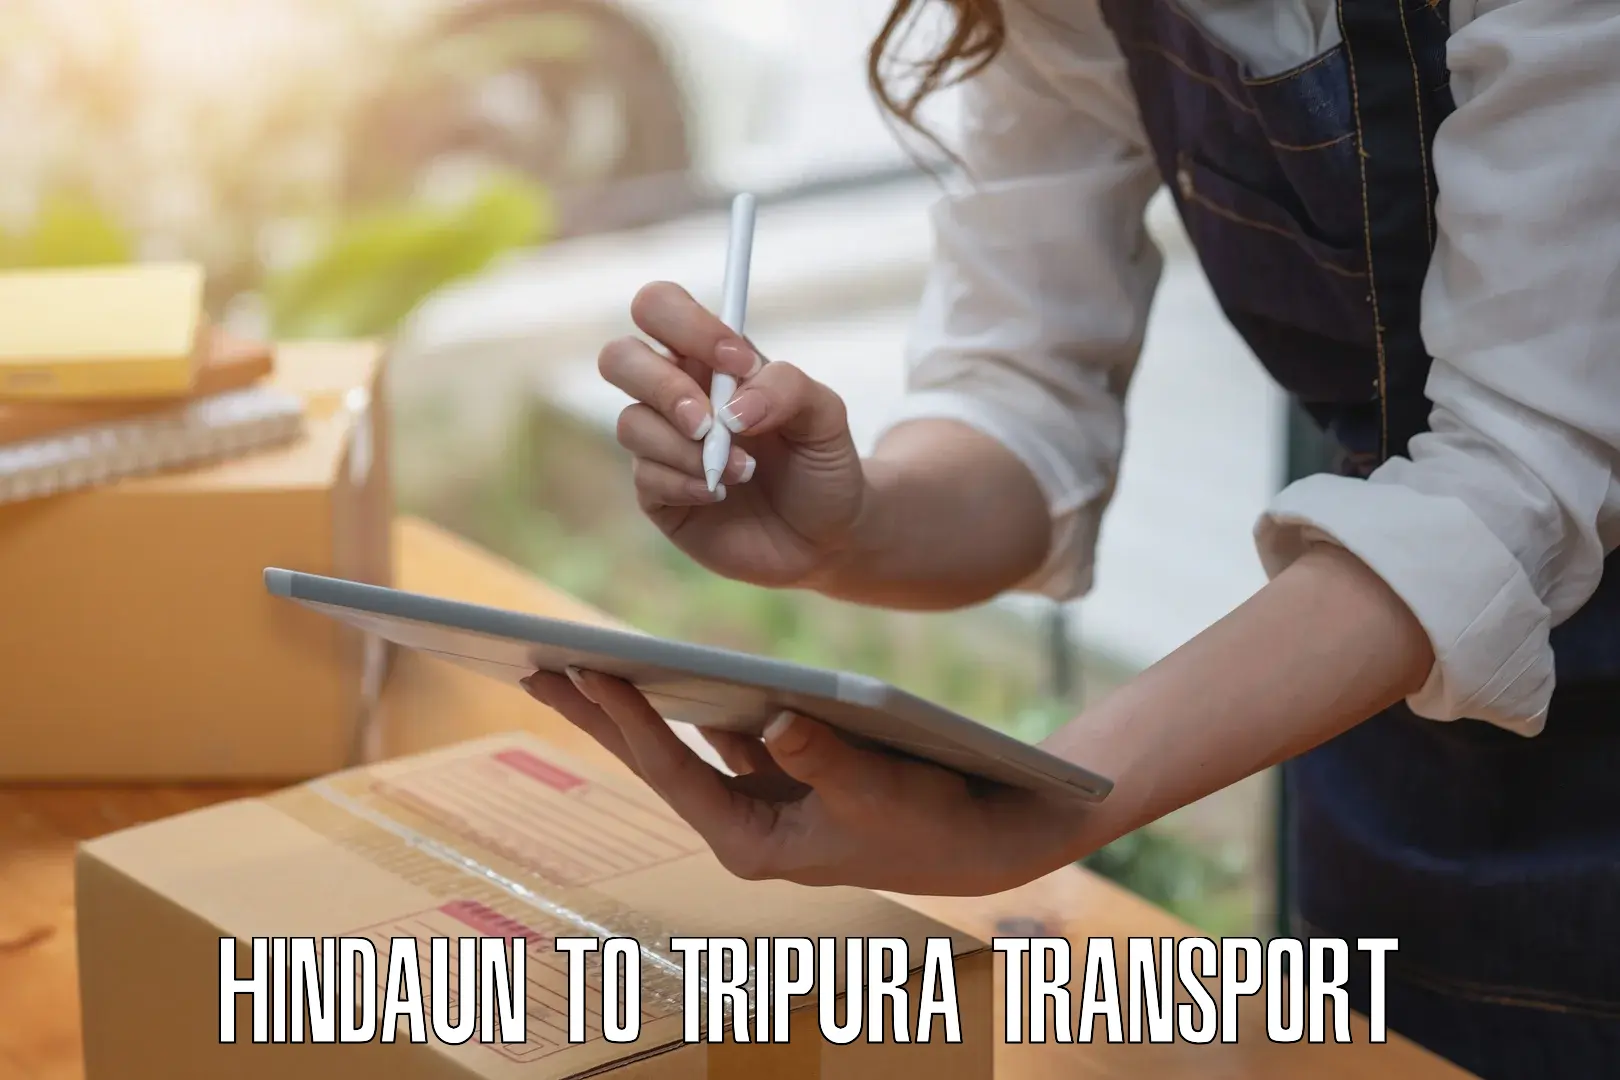 Transport shared services in Hindaun to Agartala